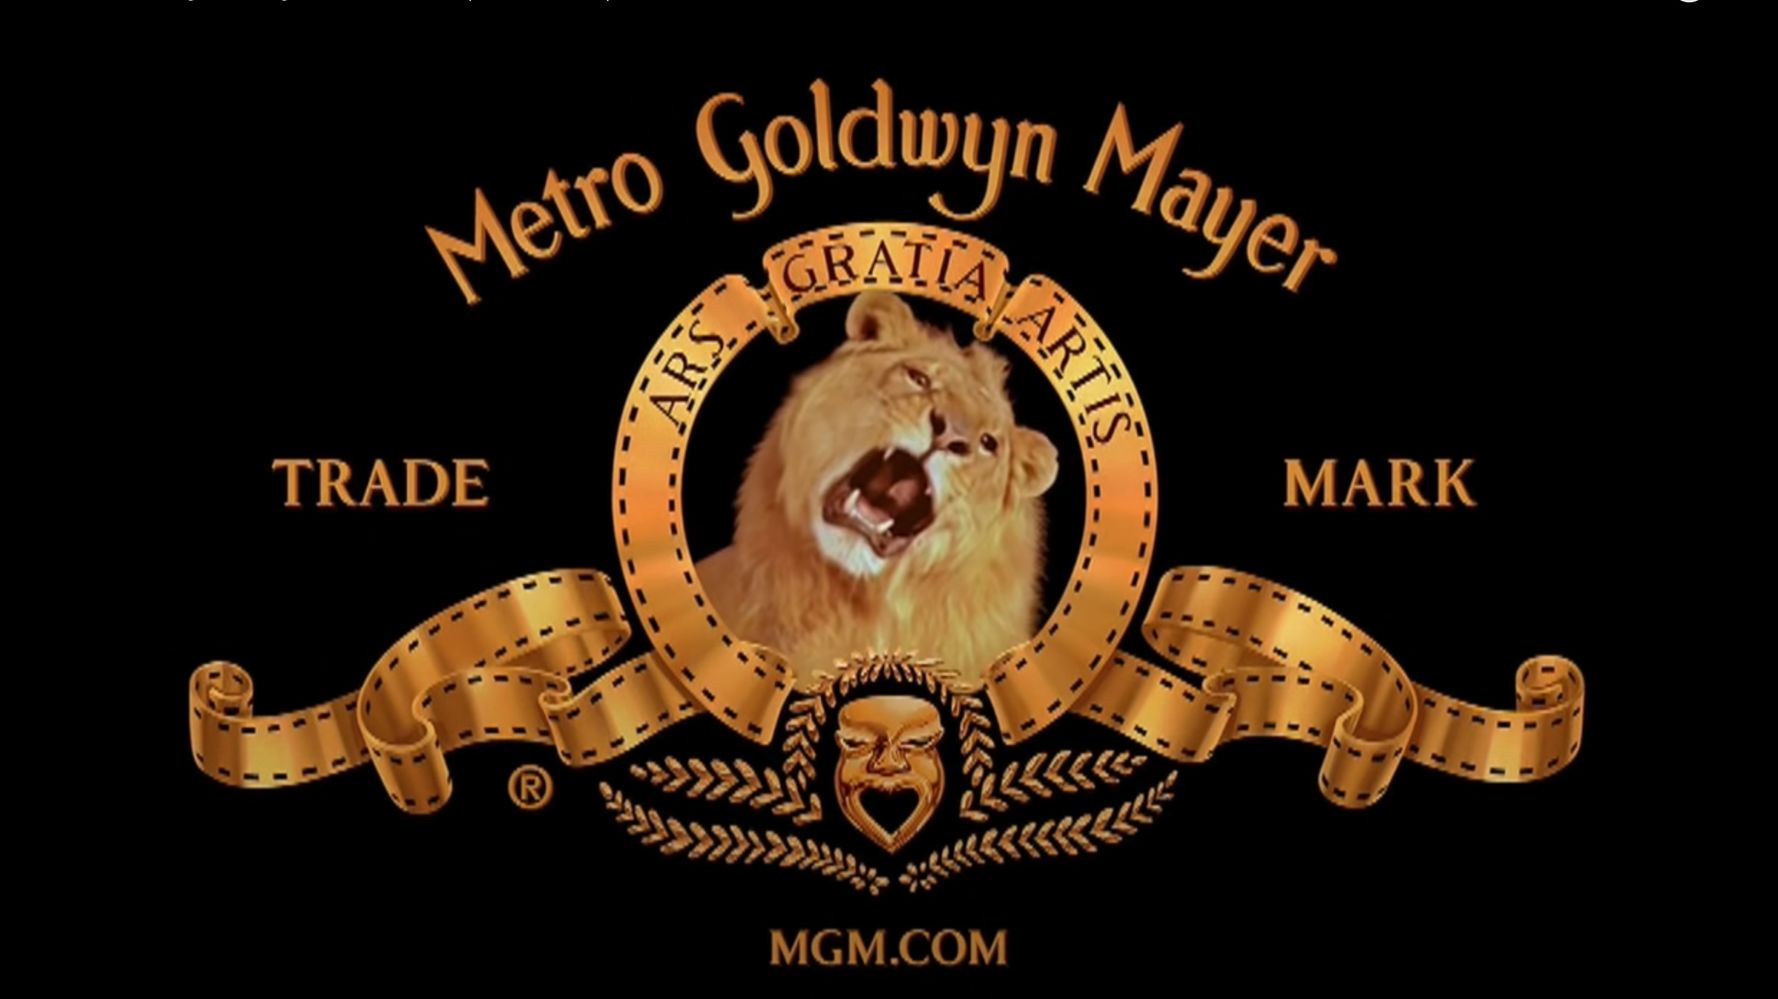 Amazon To Buy MGM For $8.45 Billion